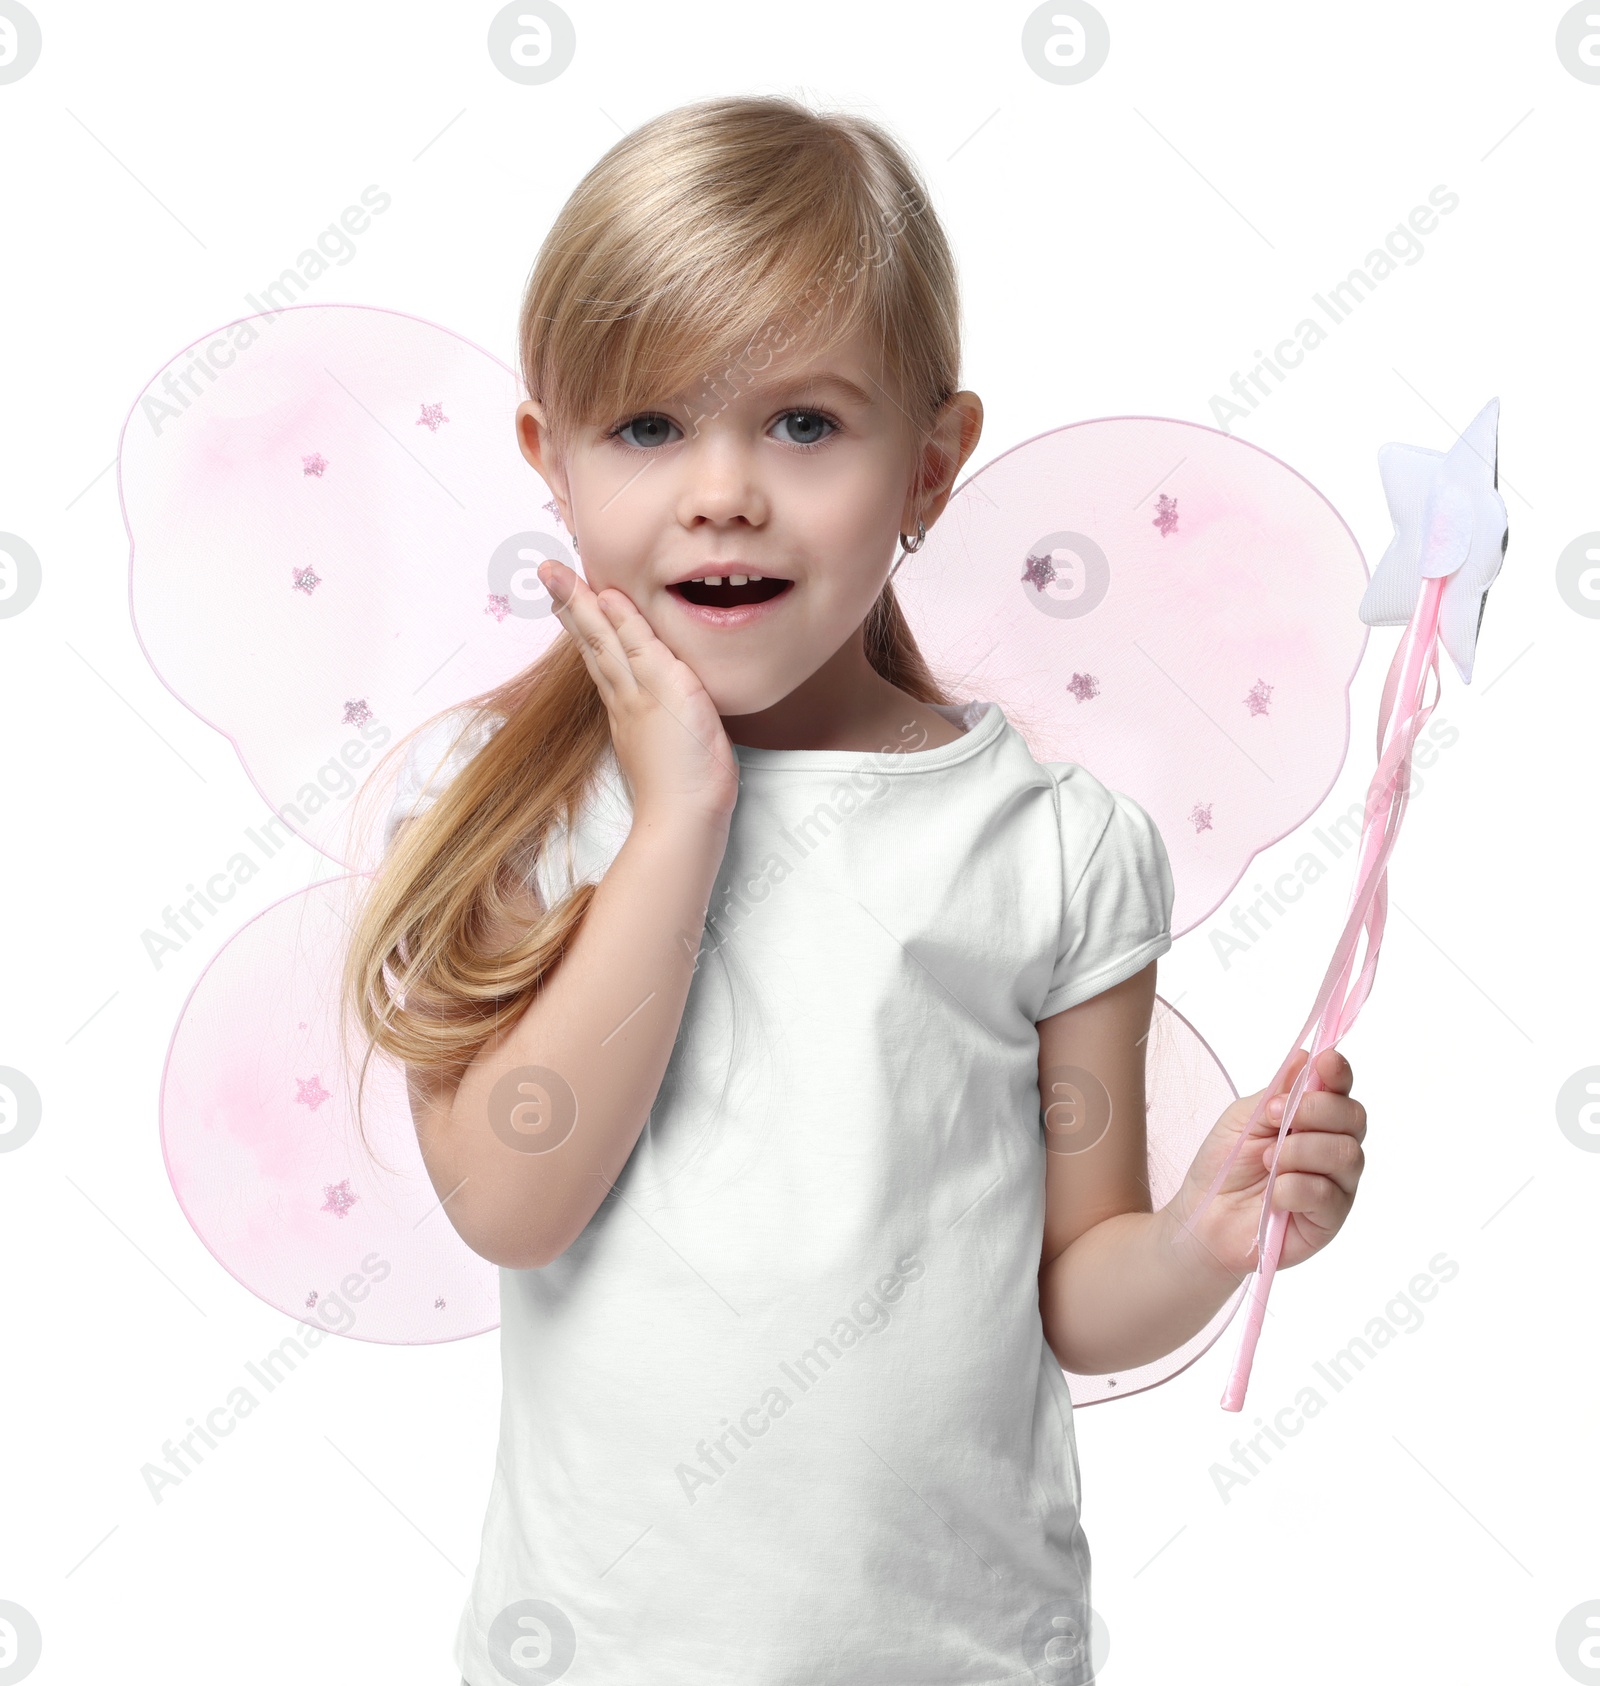 Photo of Surprised little girl in fairy costume with pink wings and magic wand on white background